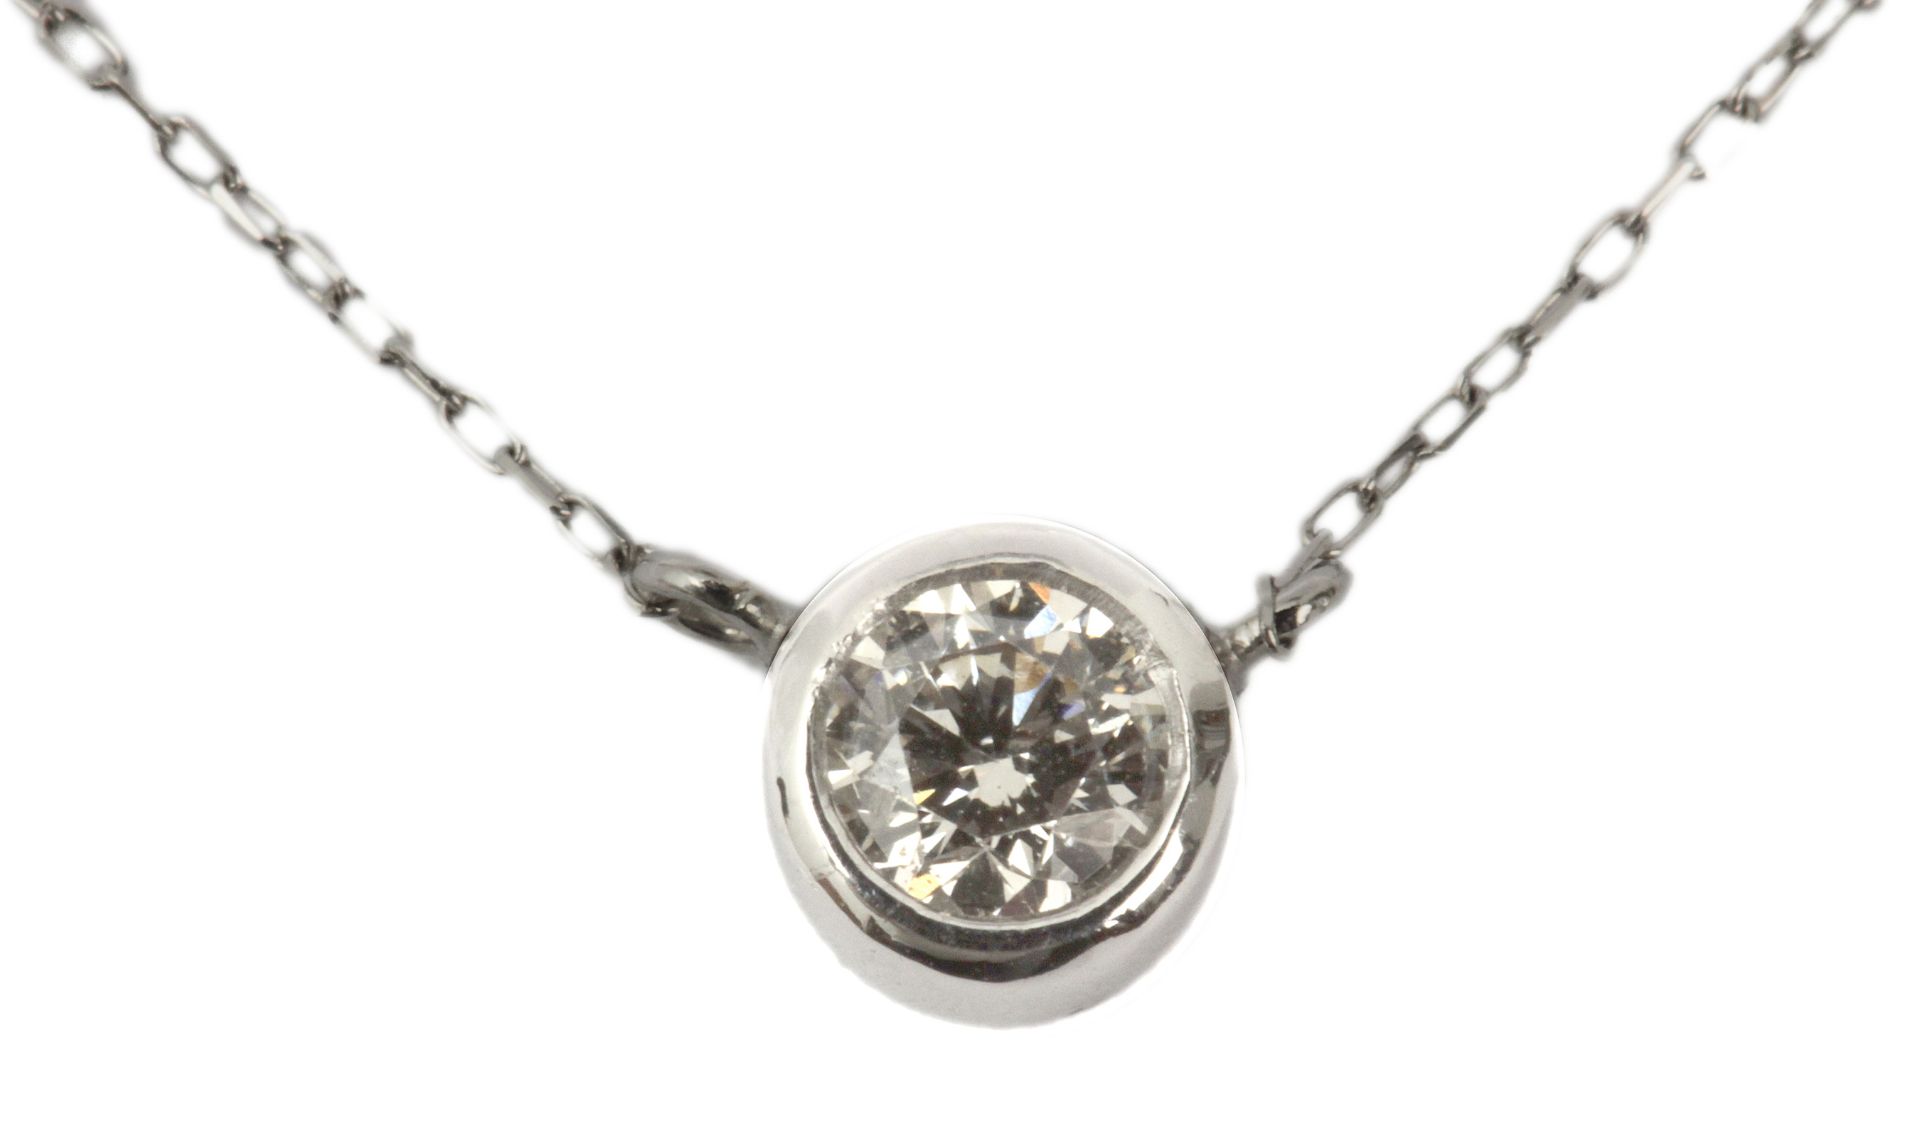 A diamond necklace. A 18 ct. brilliant cut single diamond in a 18k. white gold setting with an 18 c